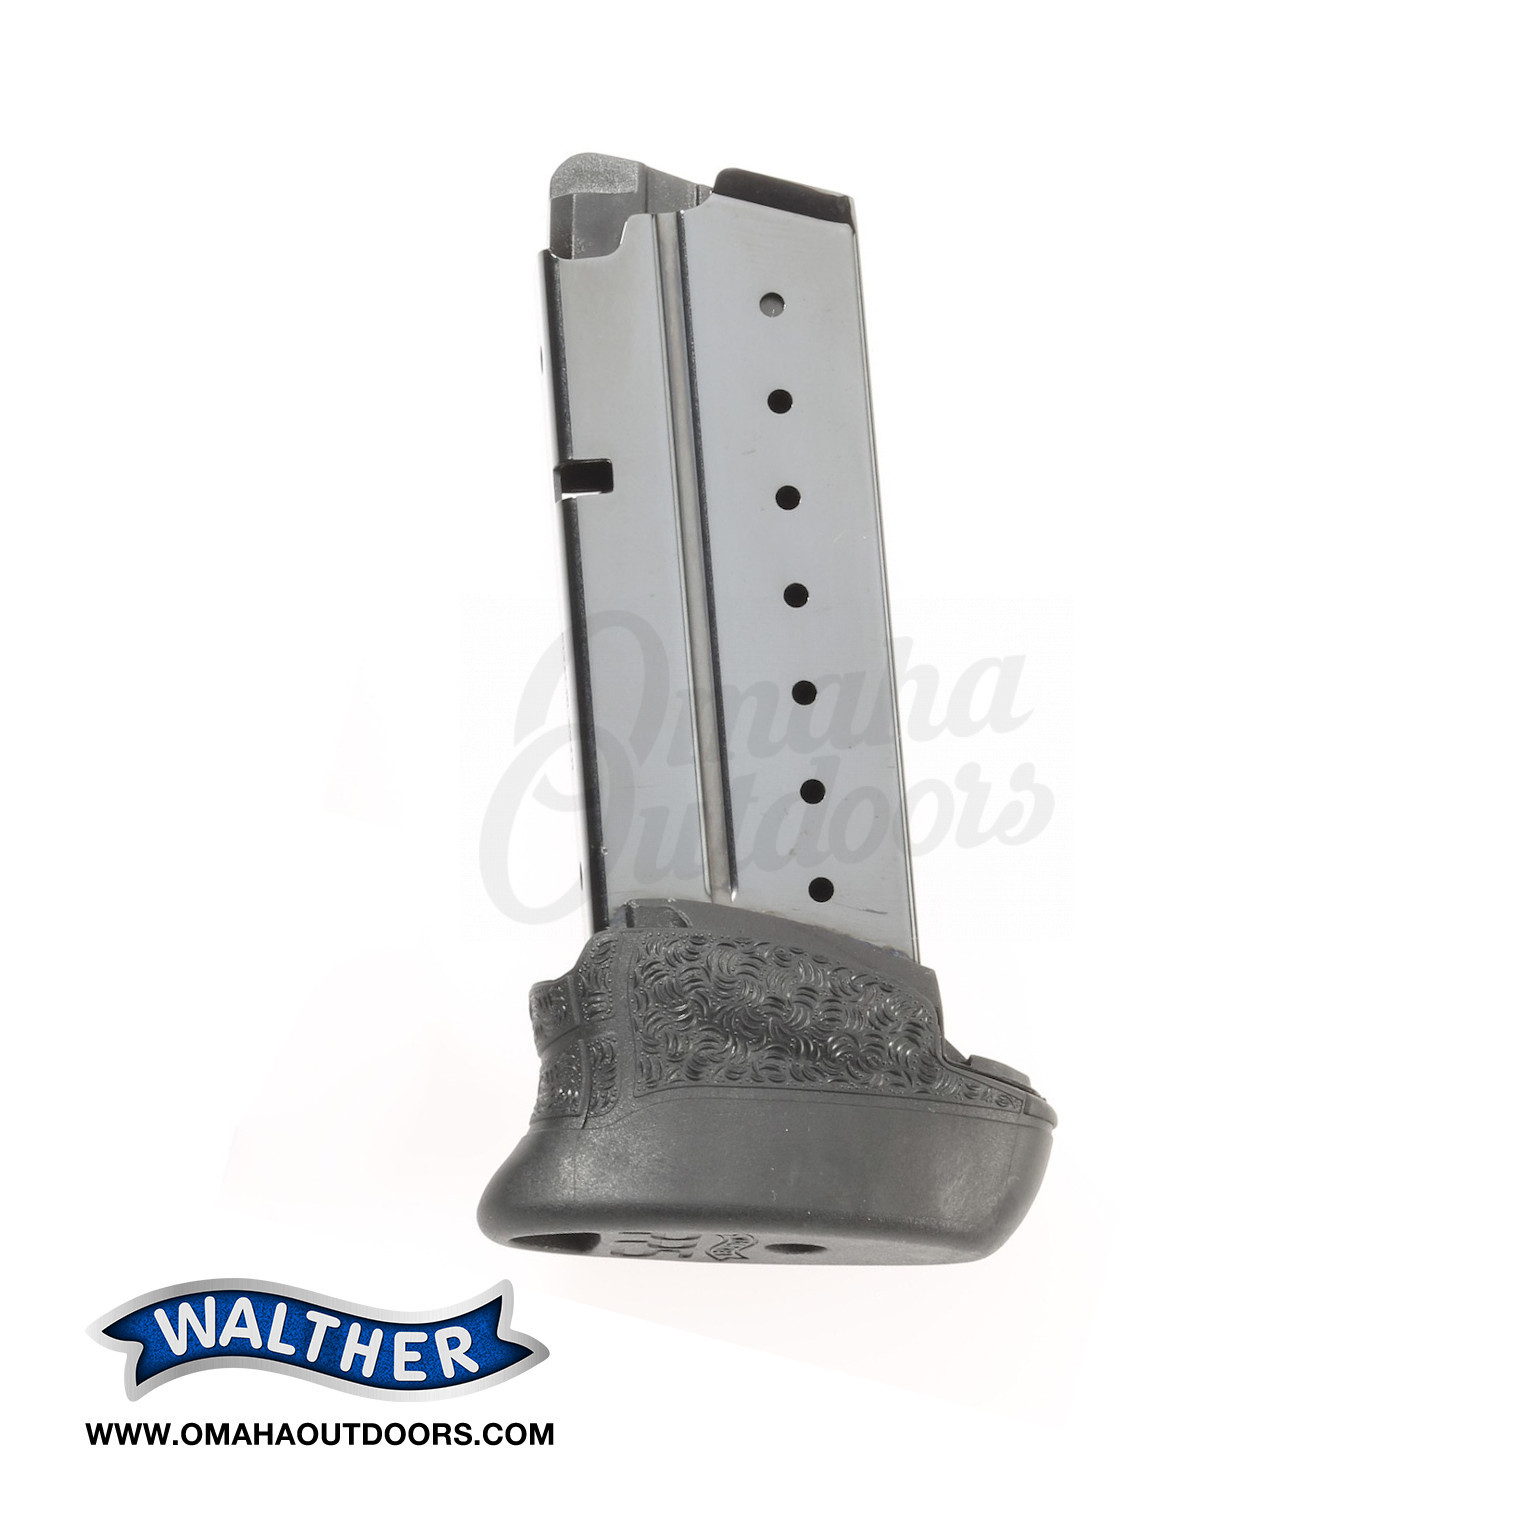 Walther 2807807 PPS M2 9mm 8-Round Magazine